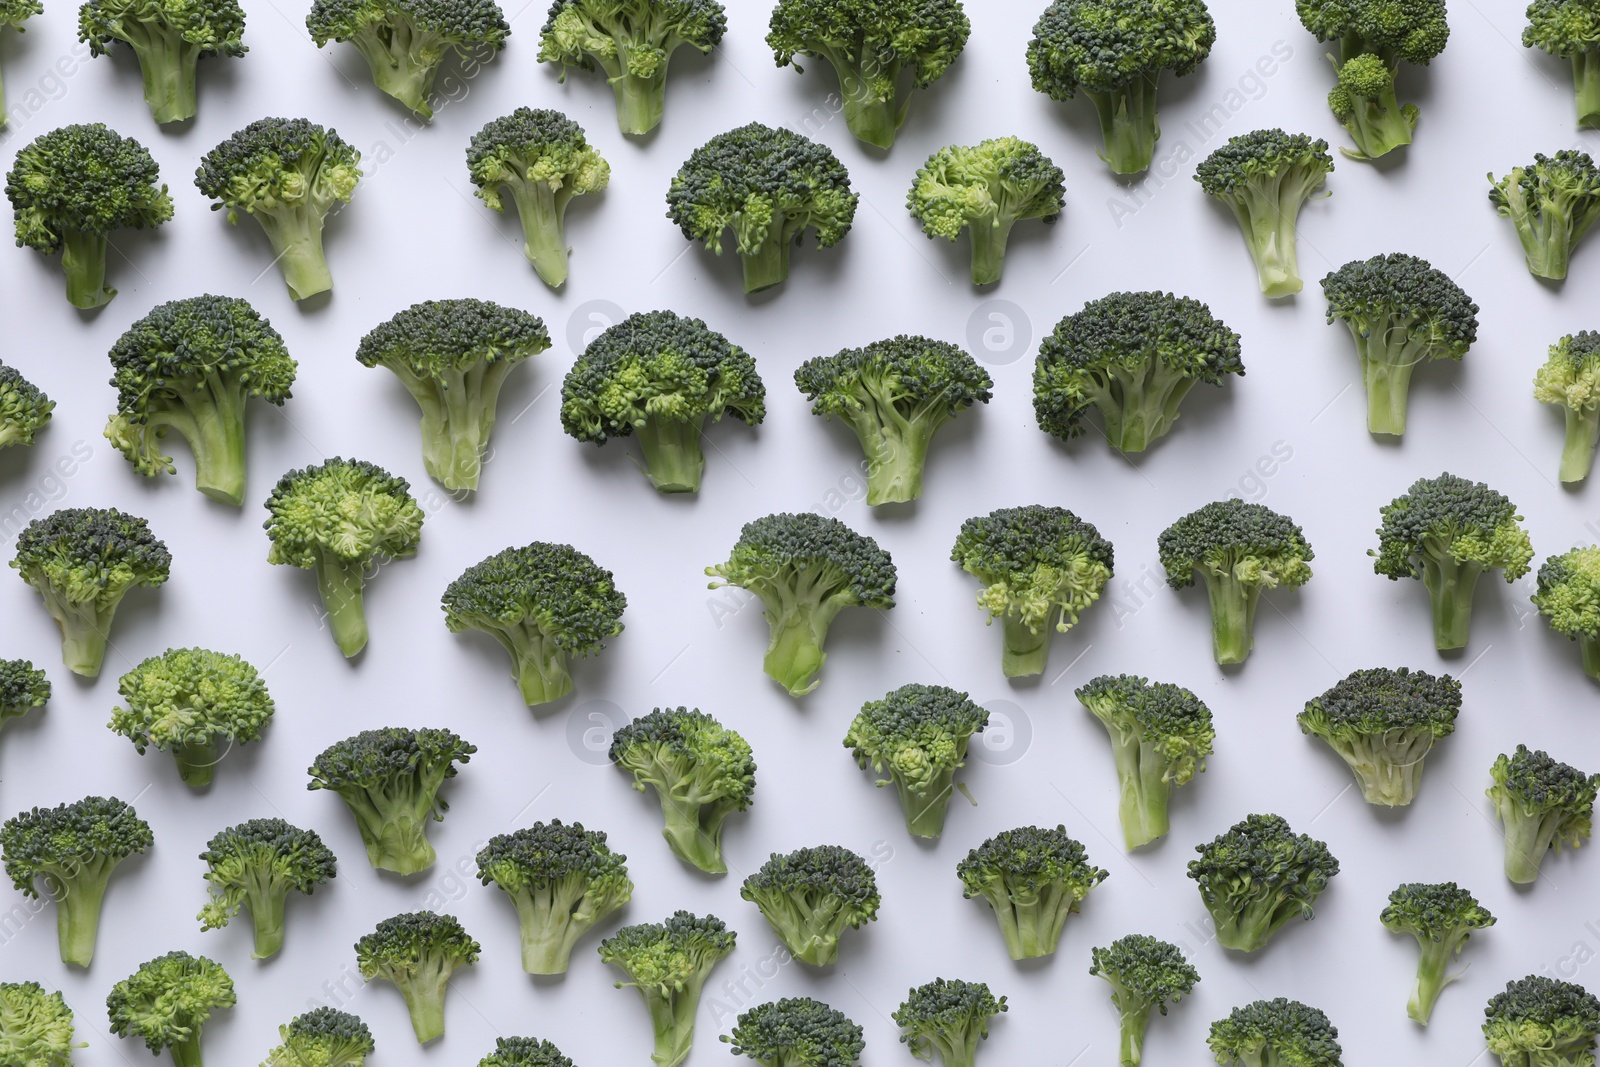 Photo of Many fresh green broccoli pieces on white background, flat lay